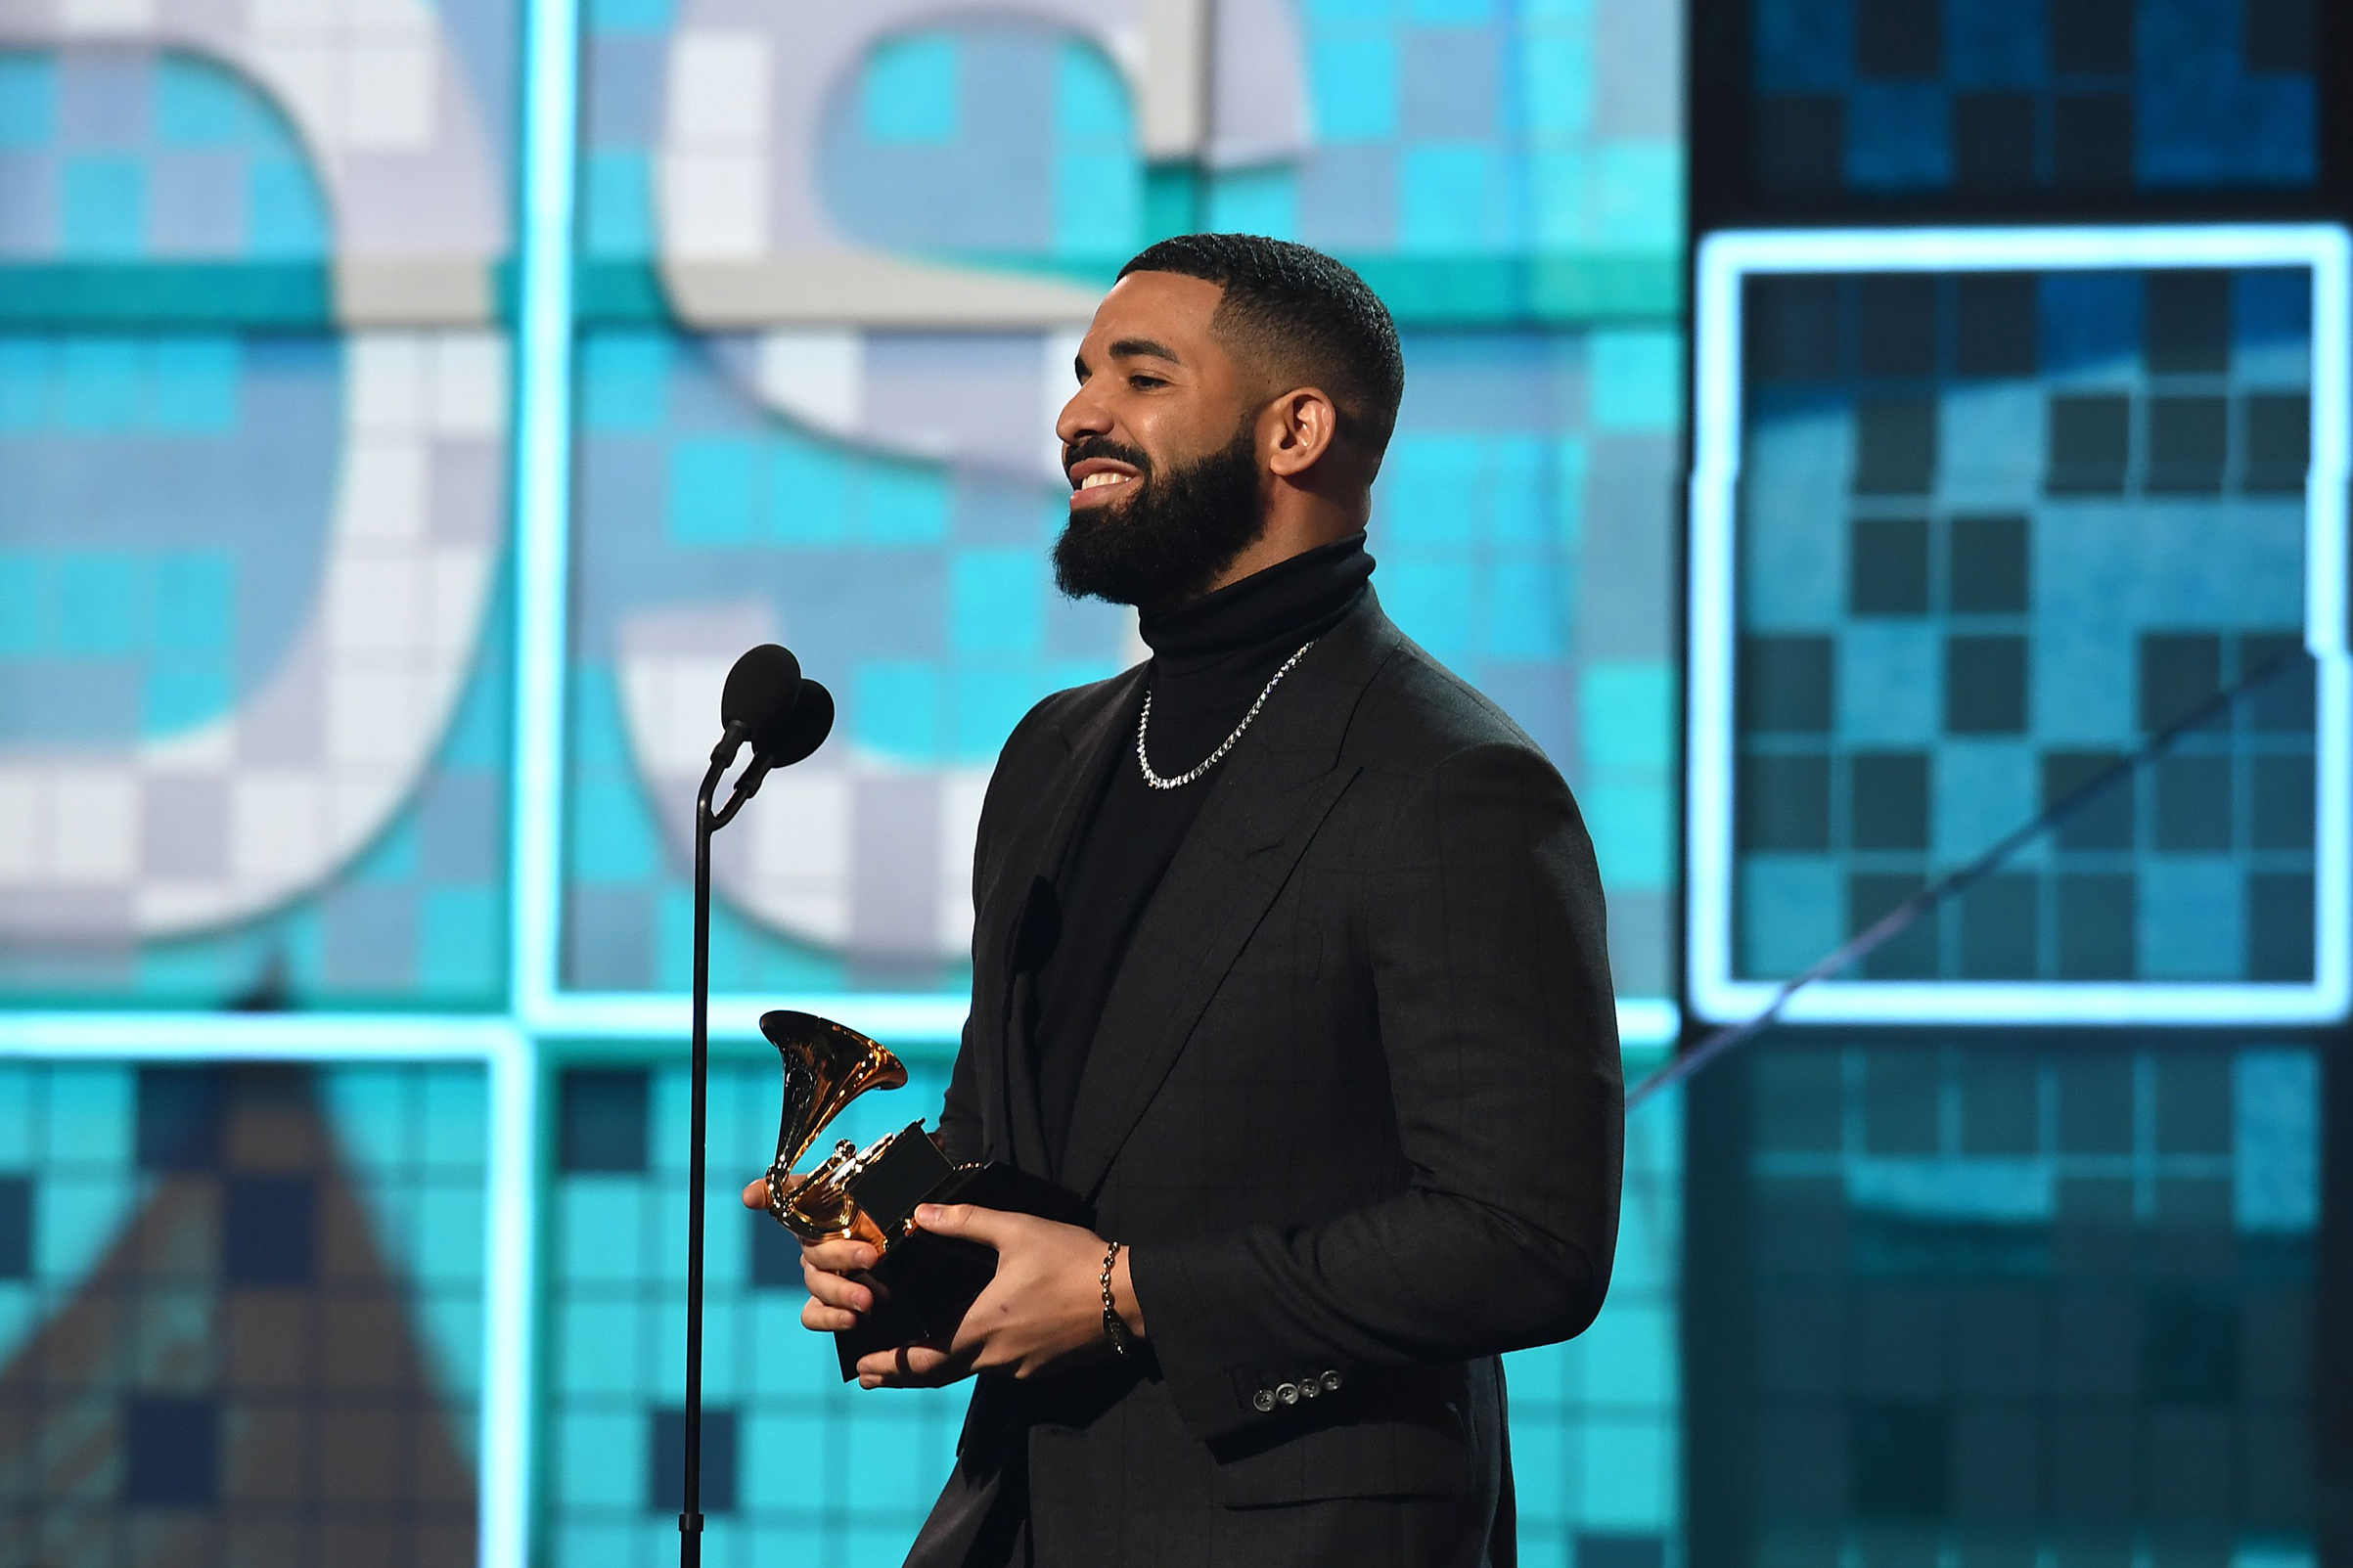 Drake accepts the award for Best Rap Song for "Gods Plan" during the 61st Annual Grammy Awards on Feb. 10, 2019, in Los Angeles. (Robyn Beck—AFP/Getty Images)